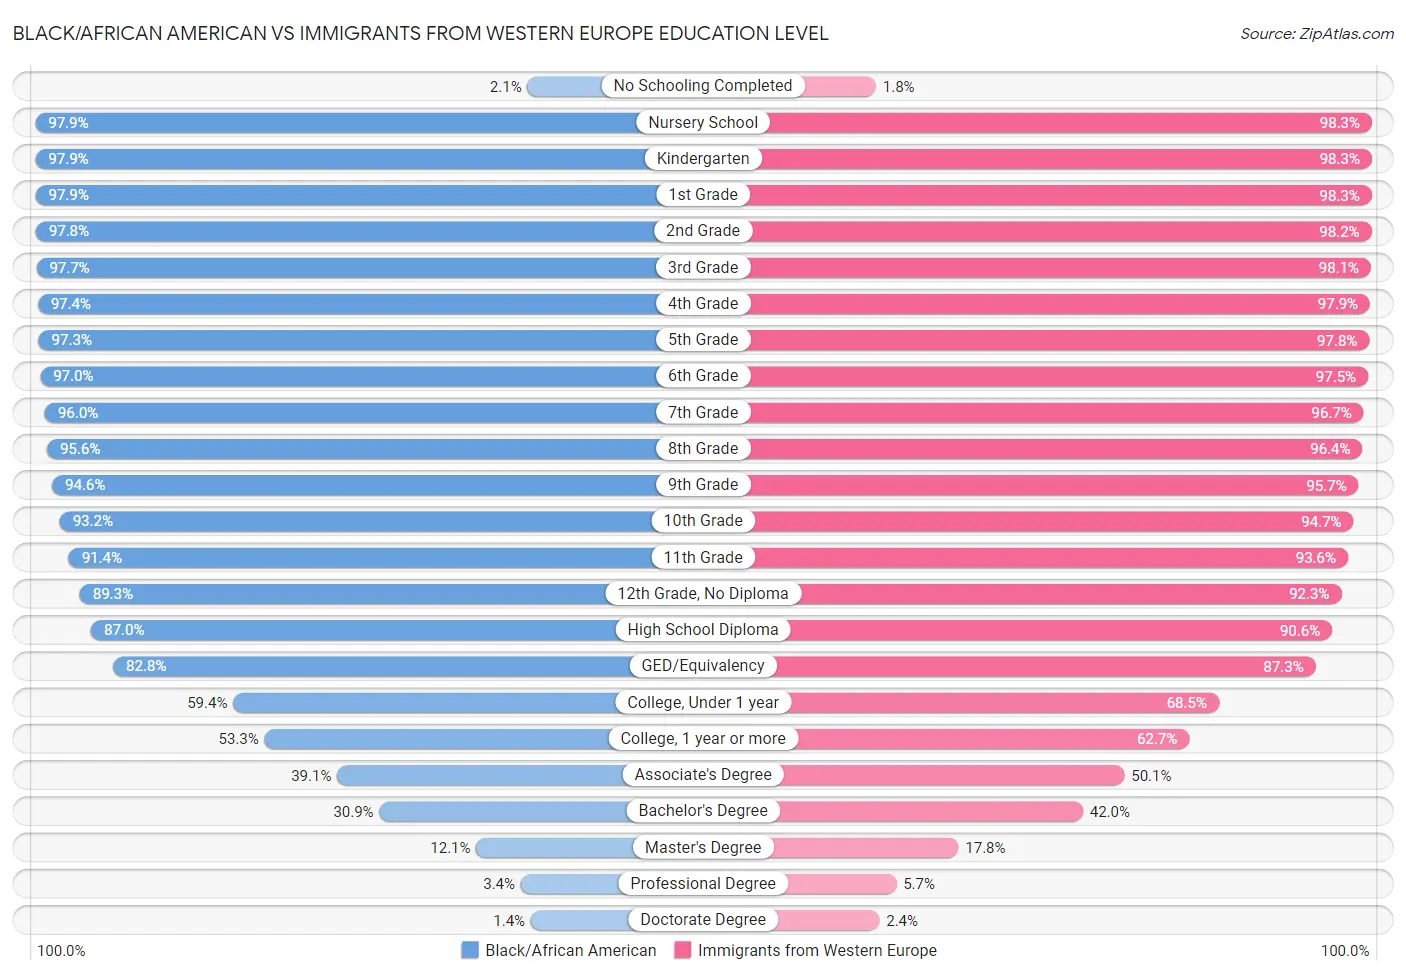 Black/African American vs Immigrants from Western Europe Education Level